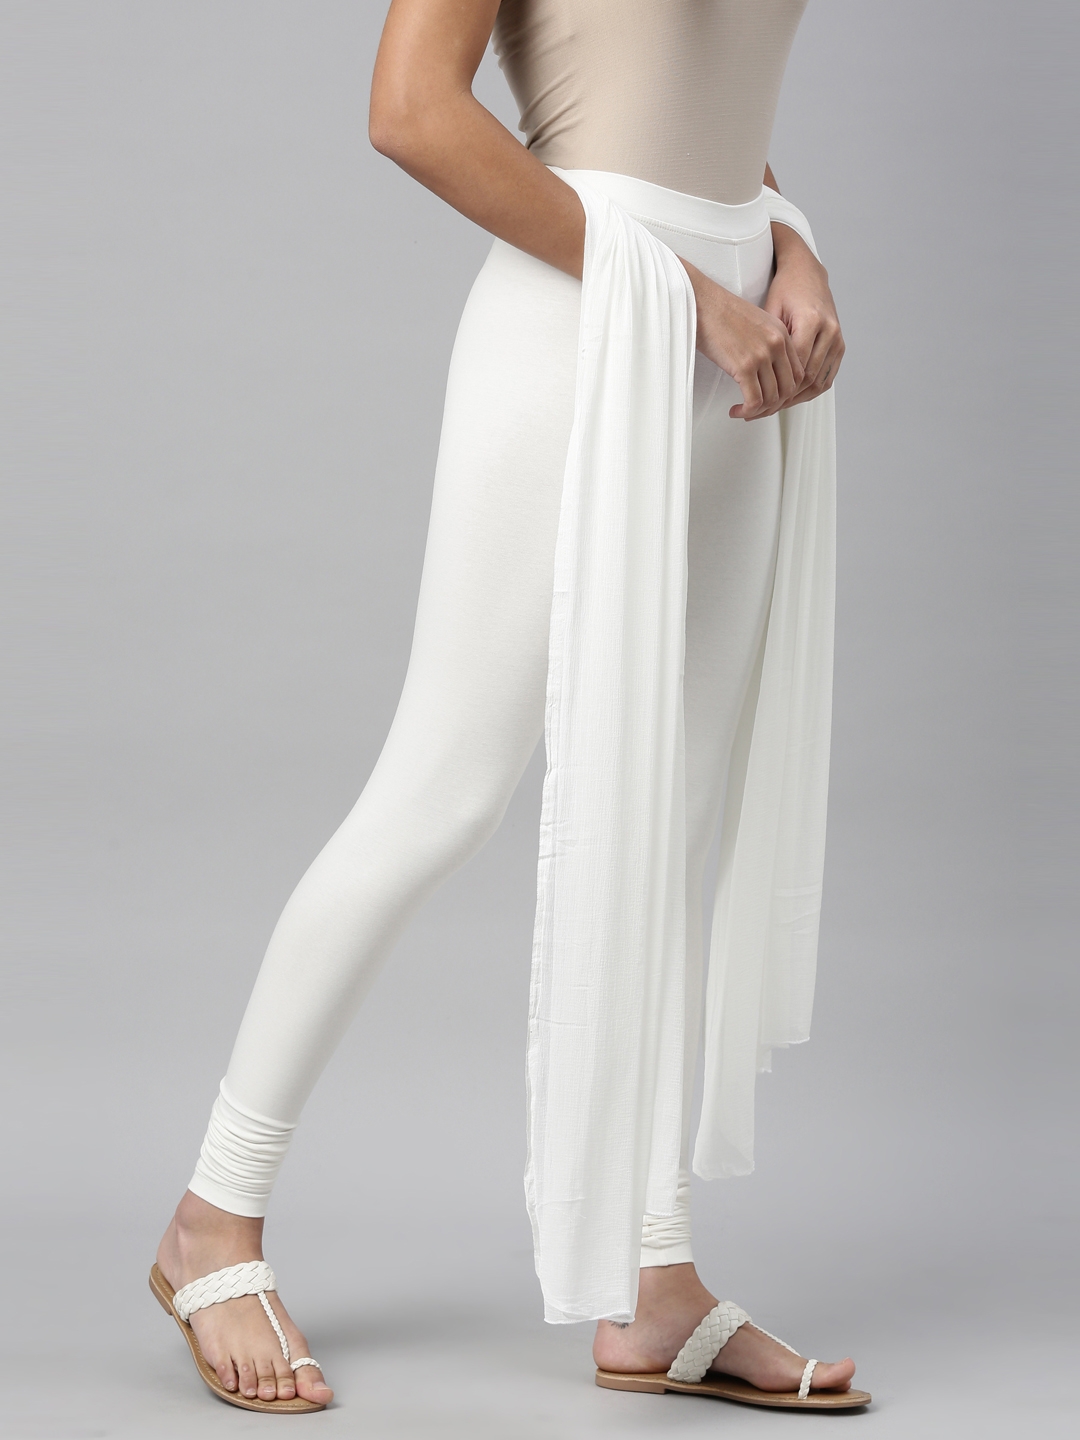 Twinbirds Pearl White Ankle Legging